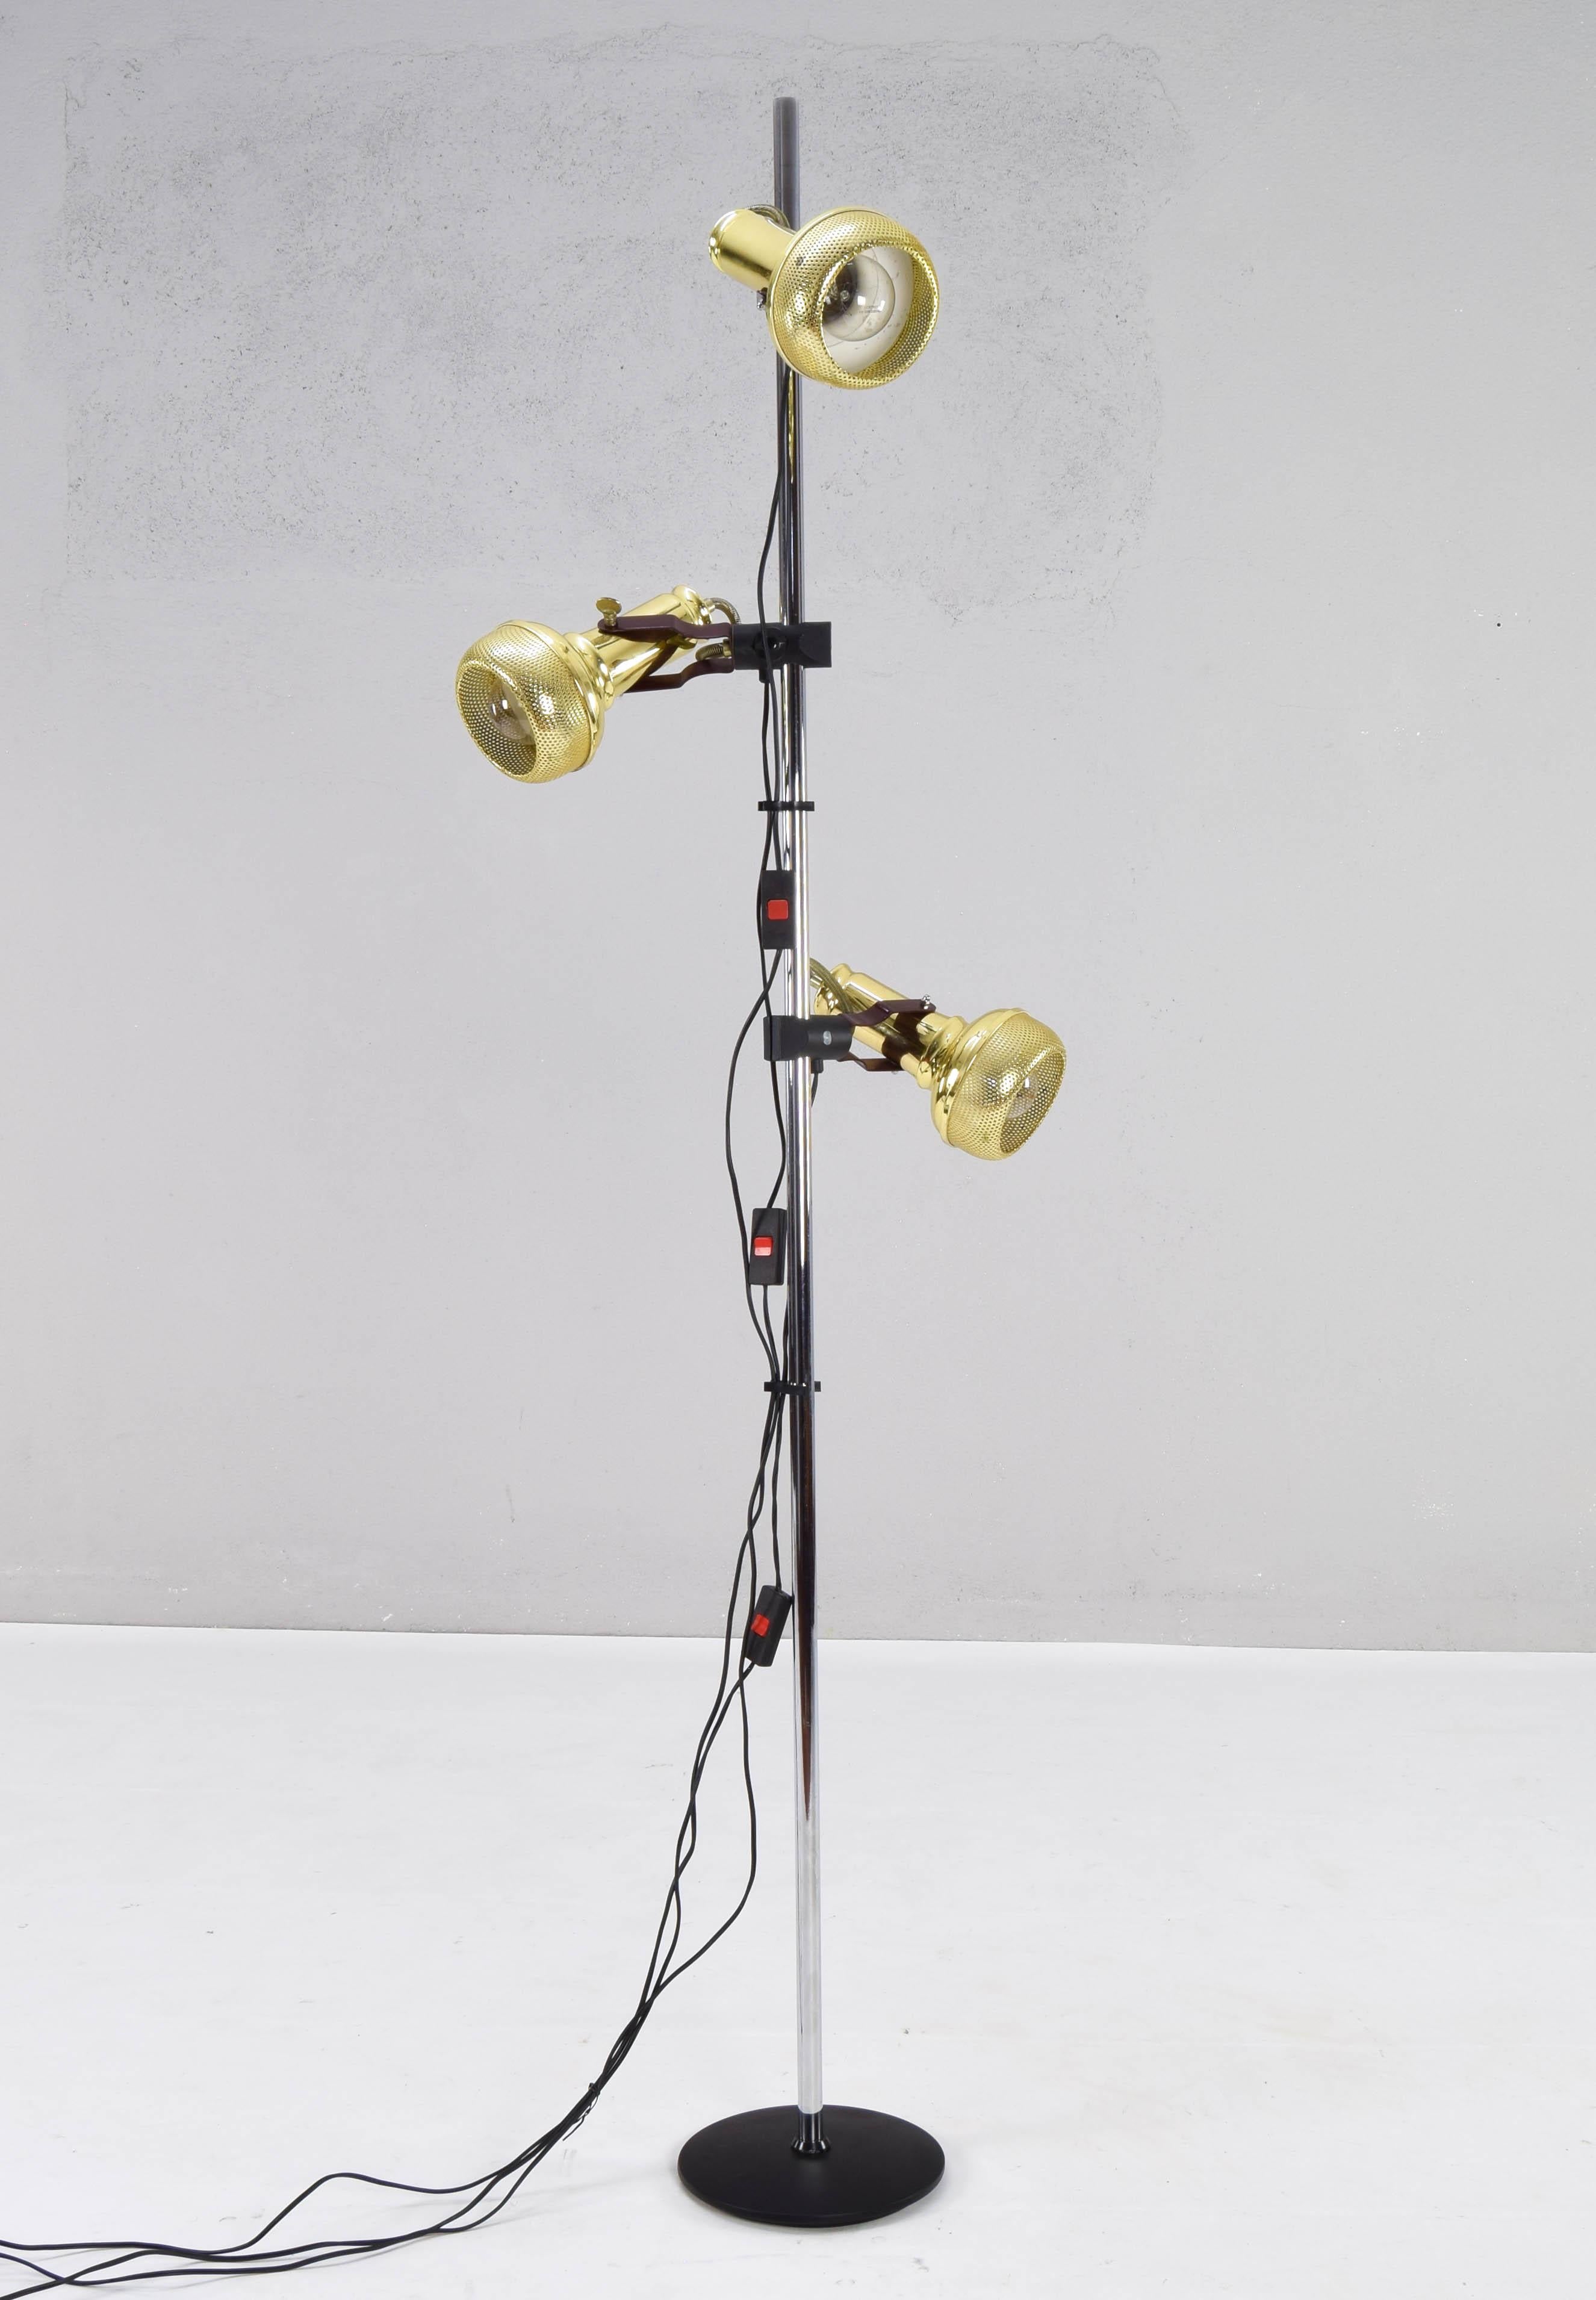 FASE Microphones Brass Mid-Century Modern Floor Lamp, Spain 70s In Good Condition For Sale In Escalona, Toledo